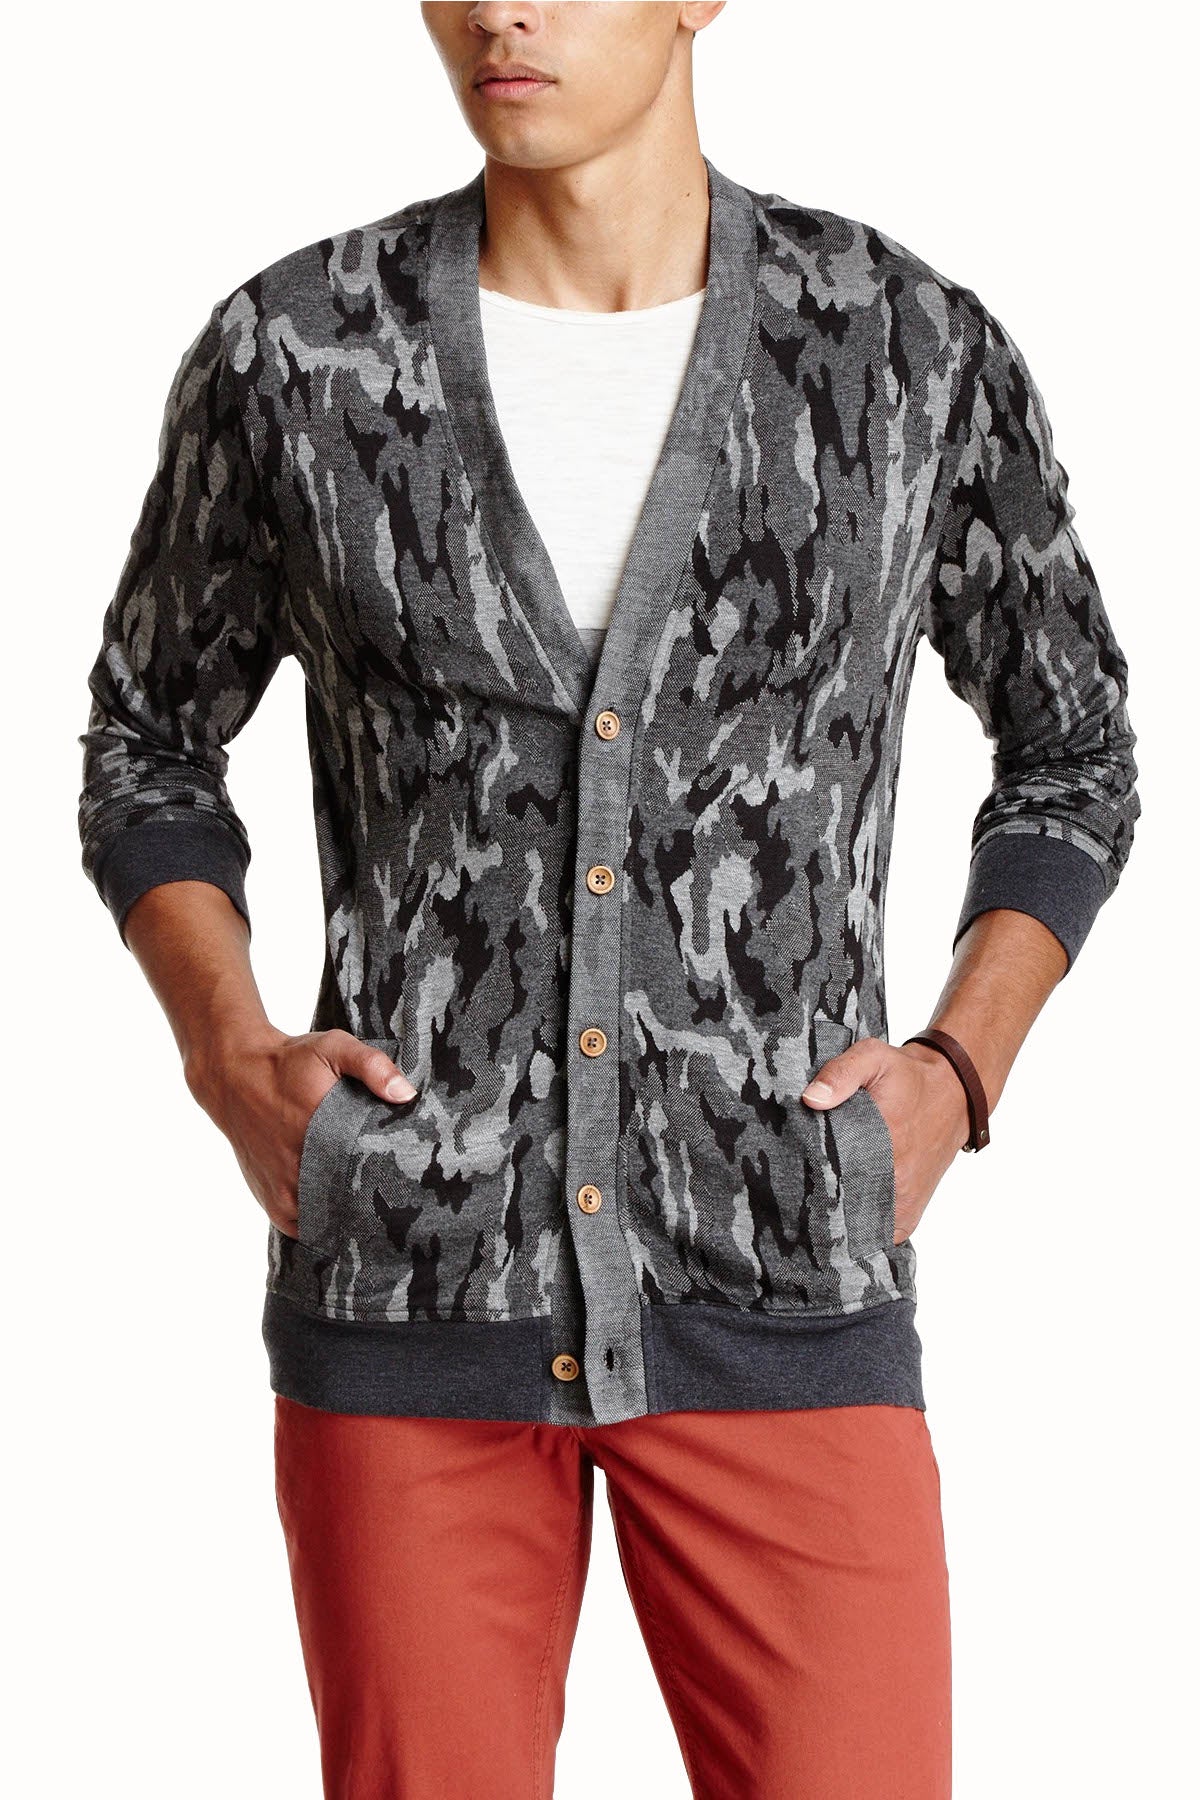 Cohesive & Co. Grey Gerome Camouflaged Cardigan